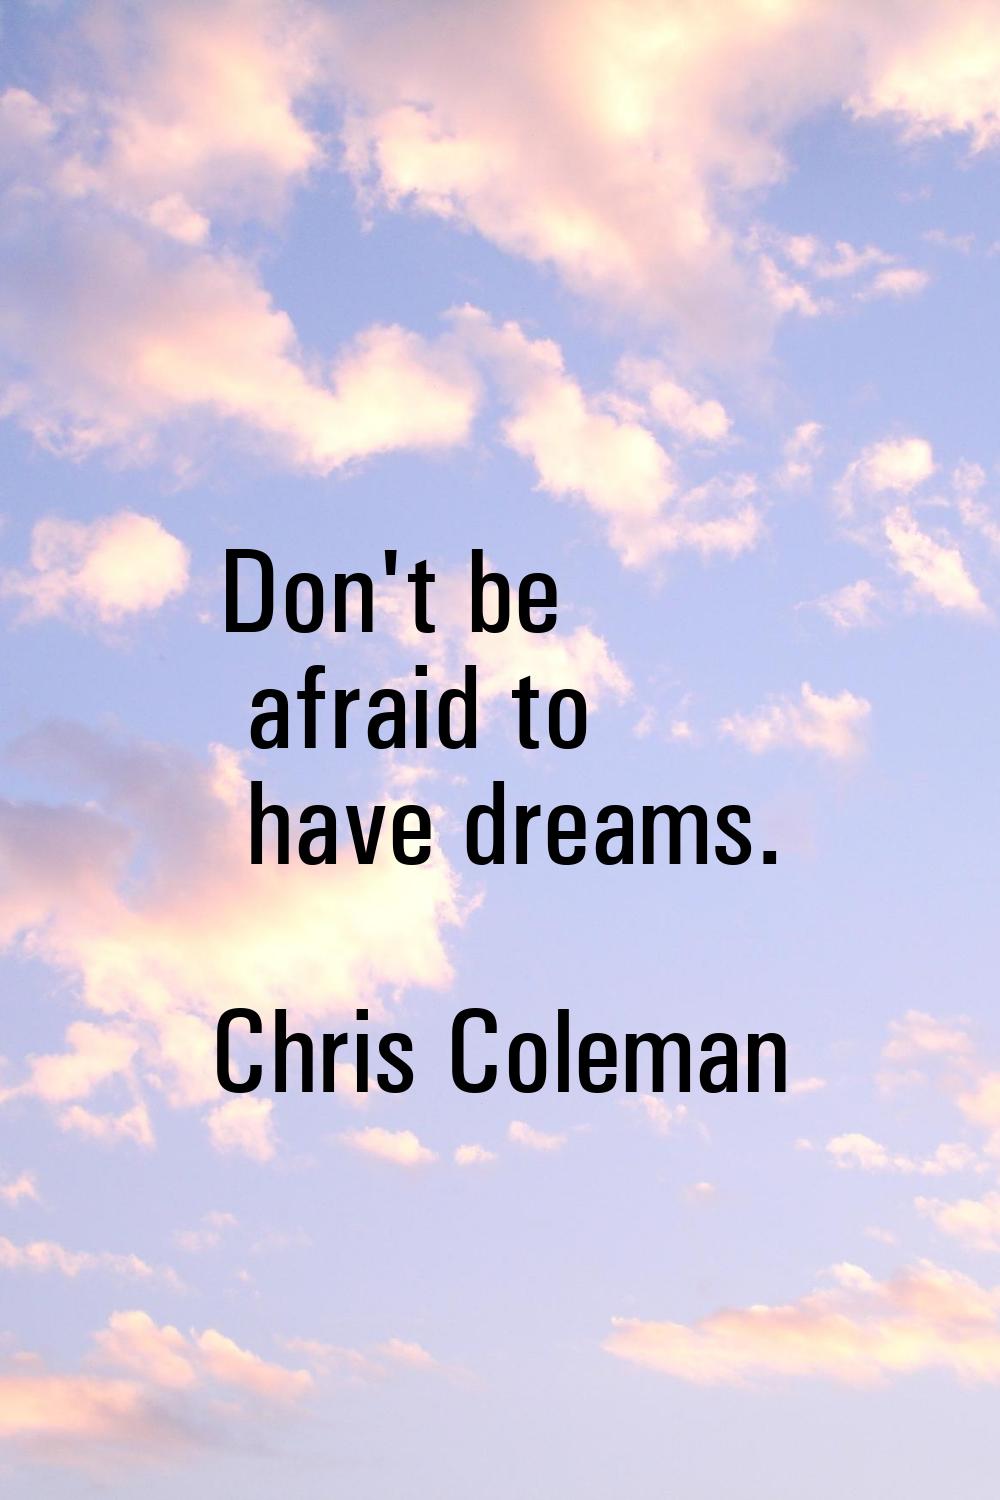 Don't be afraid to have dreams.